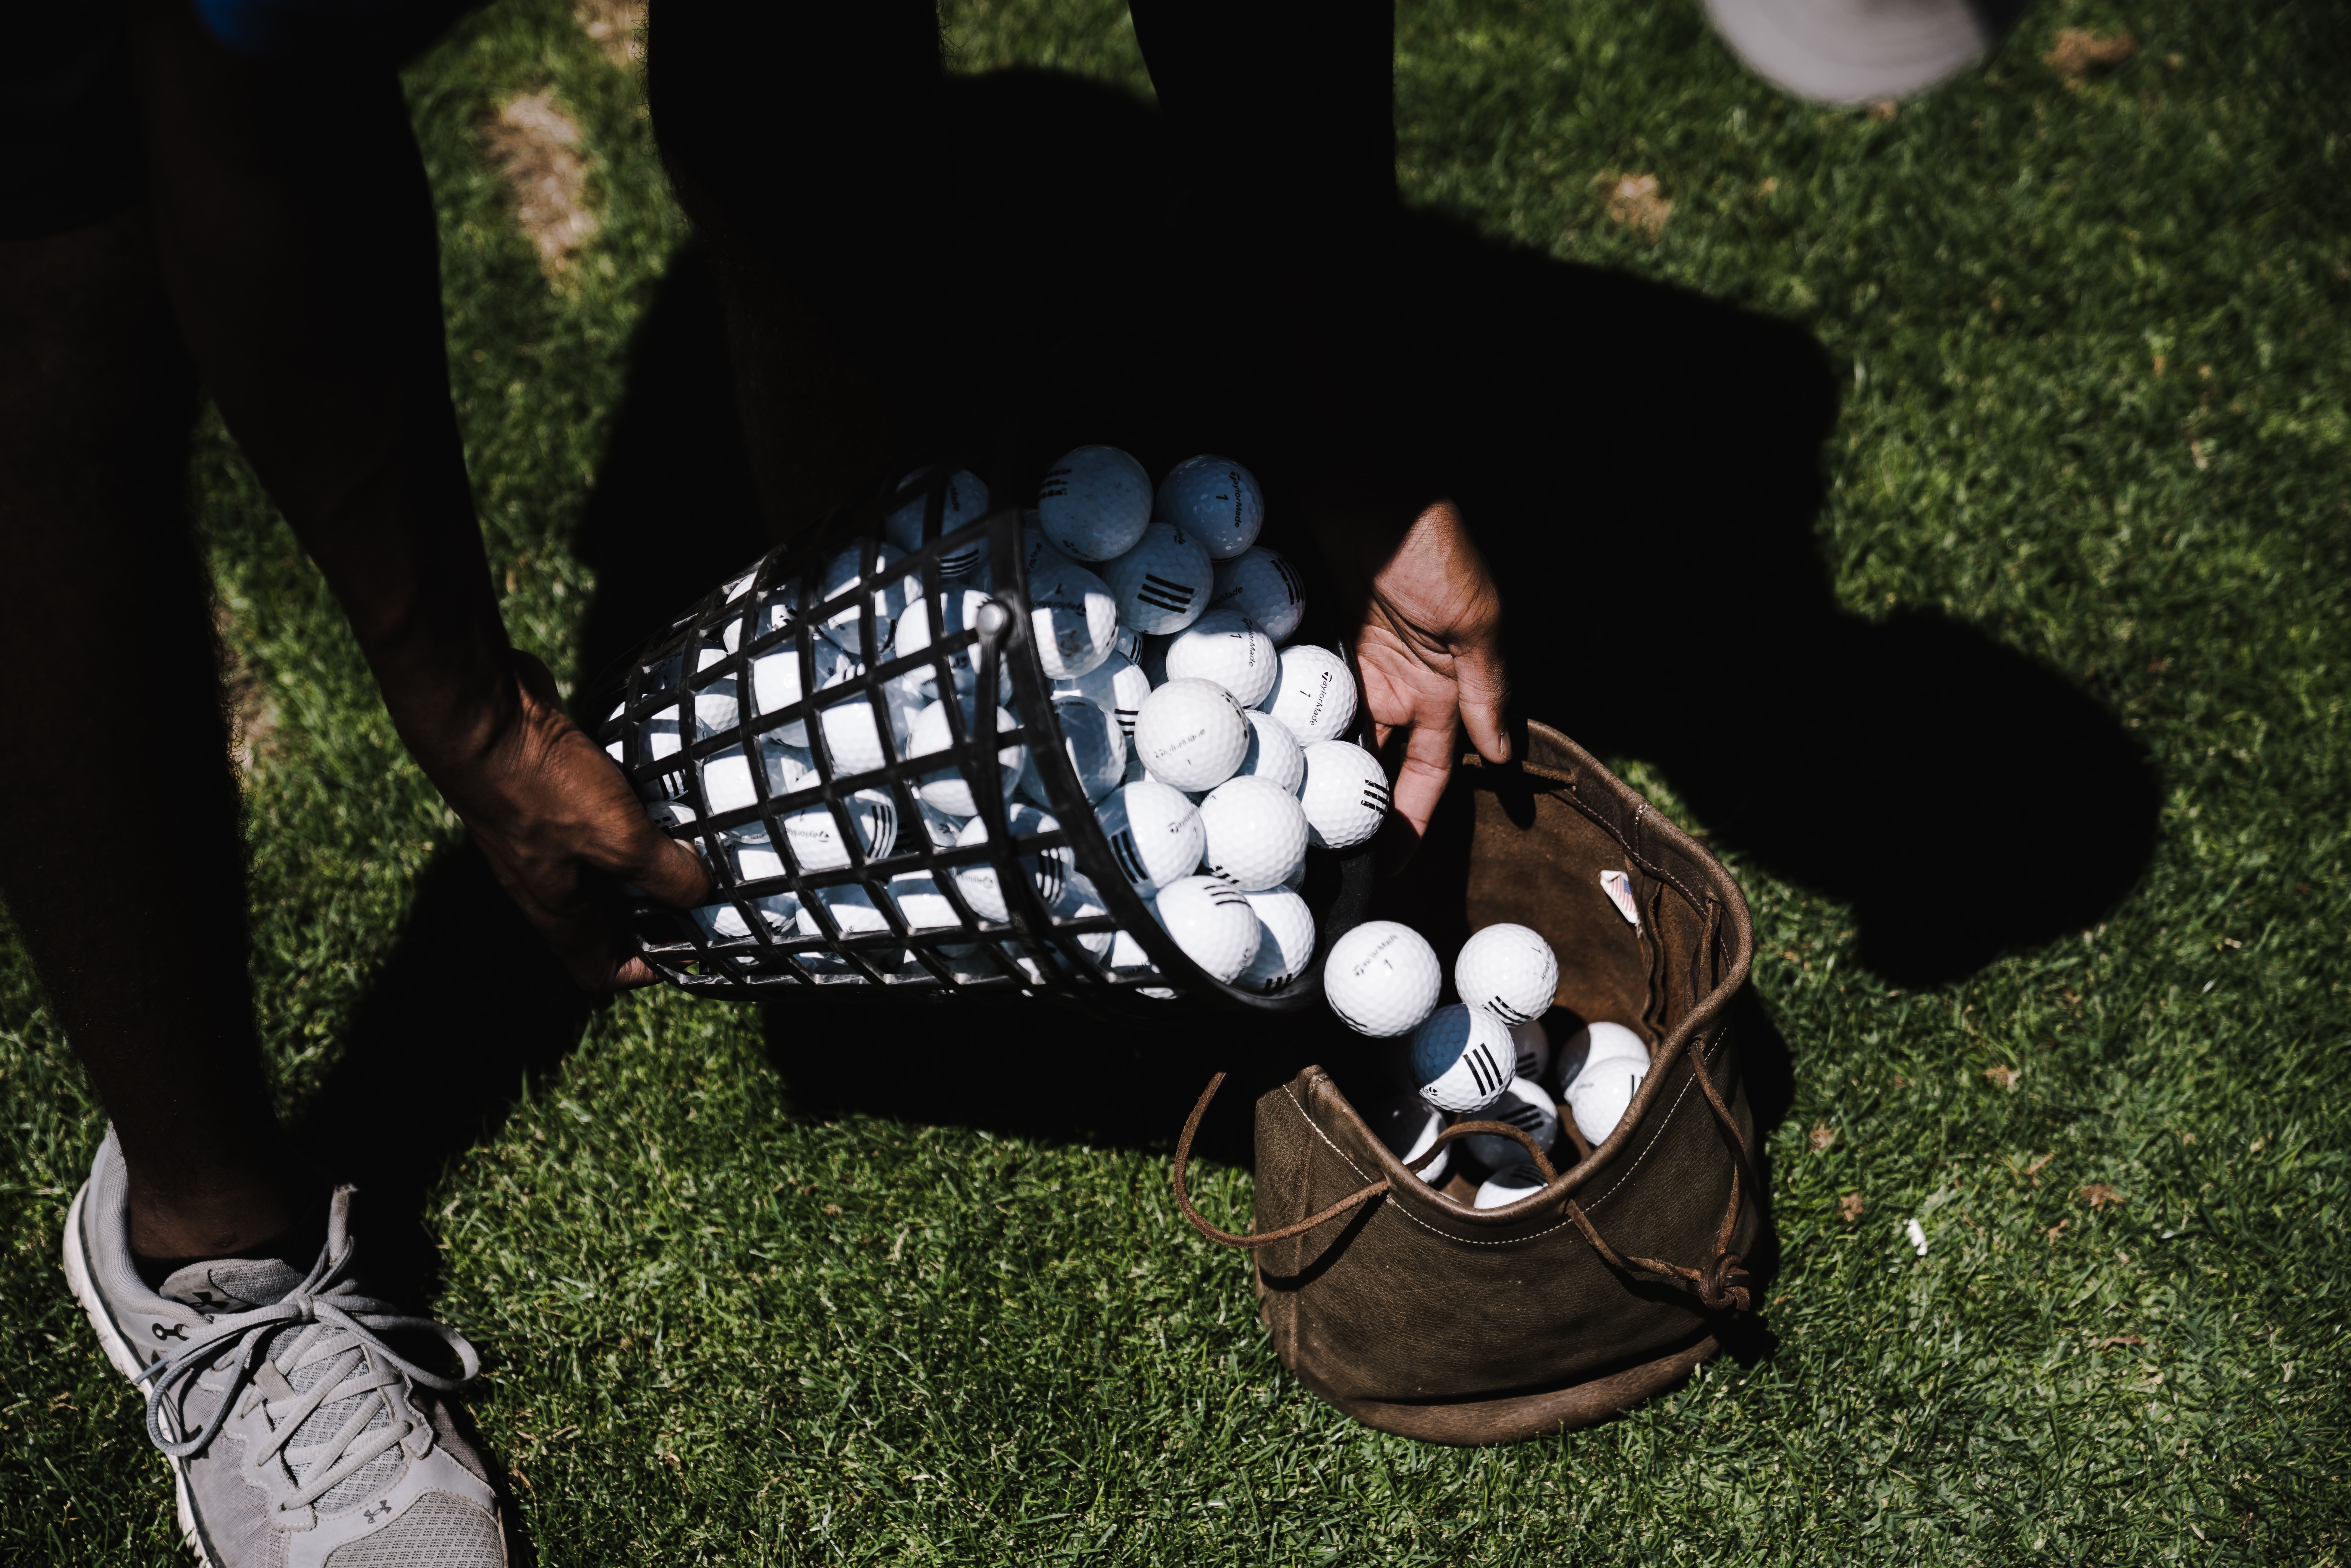 A person pouring golf balls in a brown leather bag